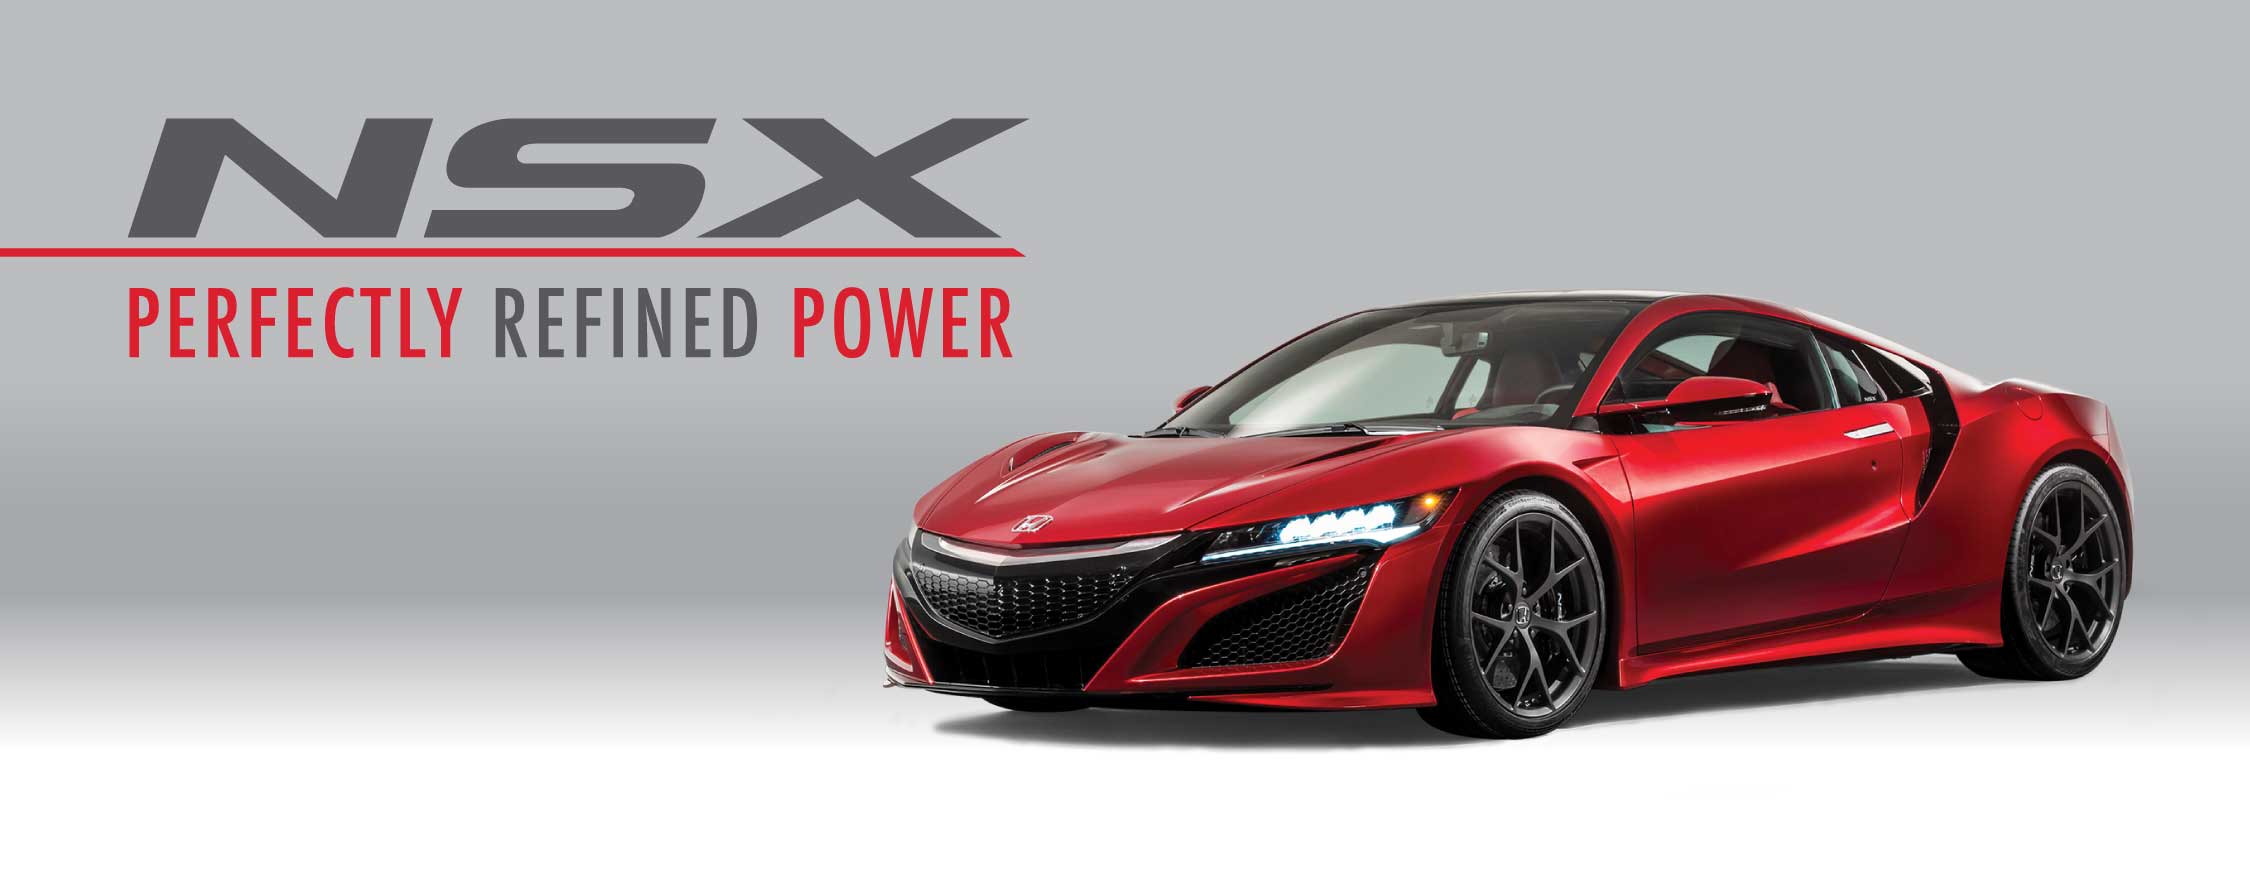 Introducing the All Honda NSX